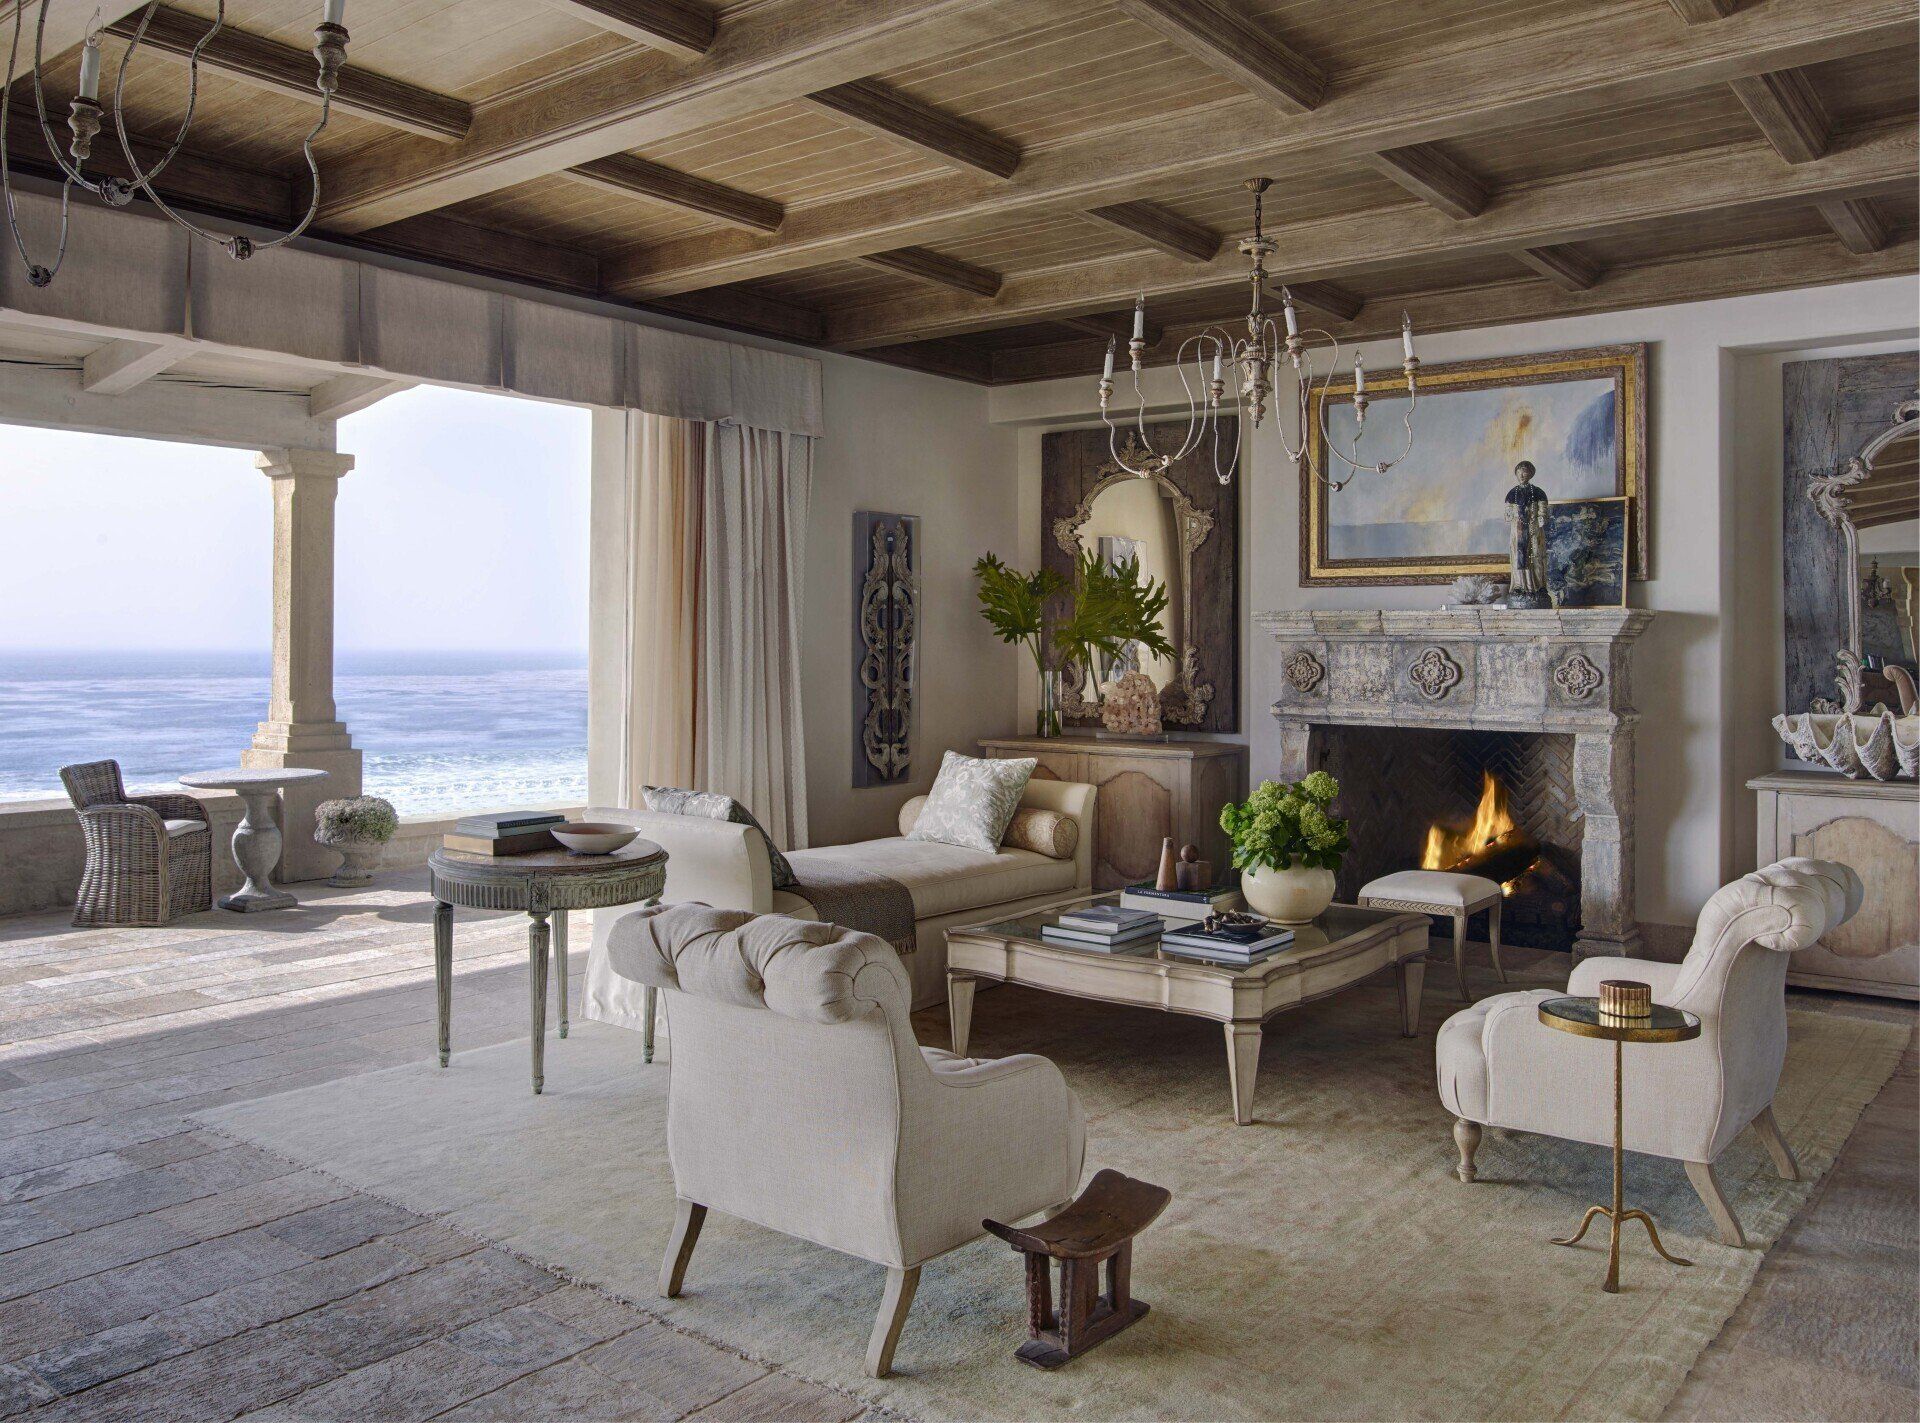 Living room in a Southern California house designed by Oatman Architects